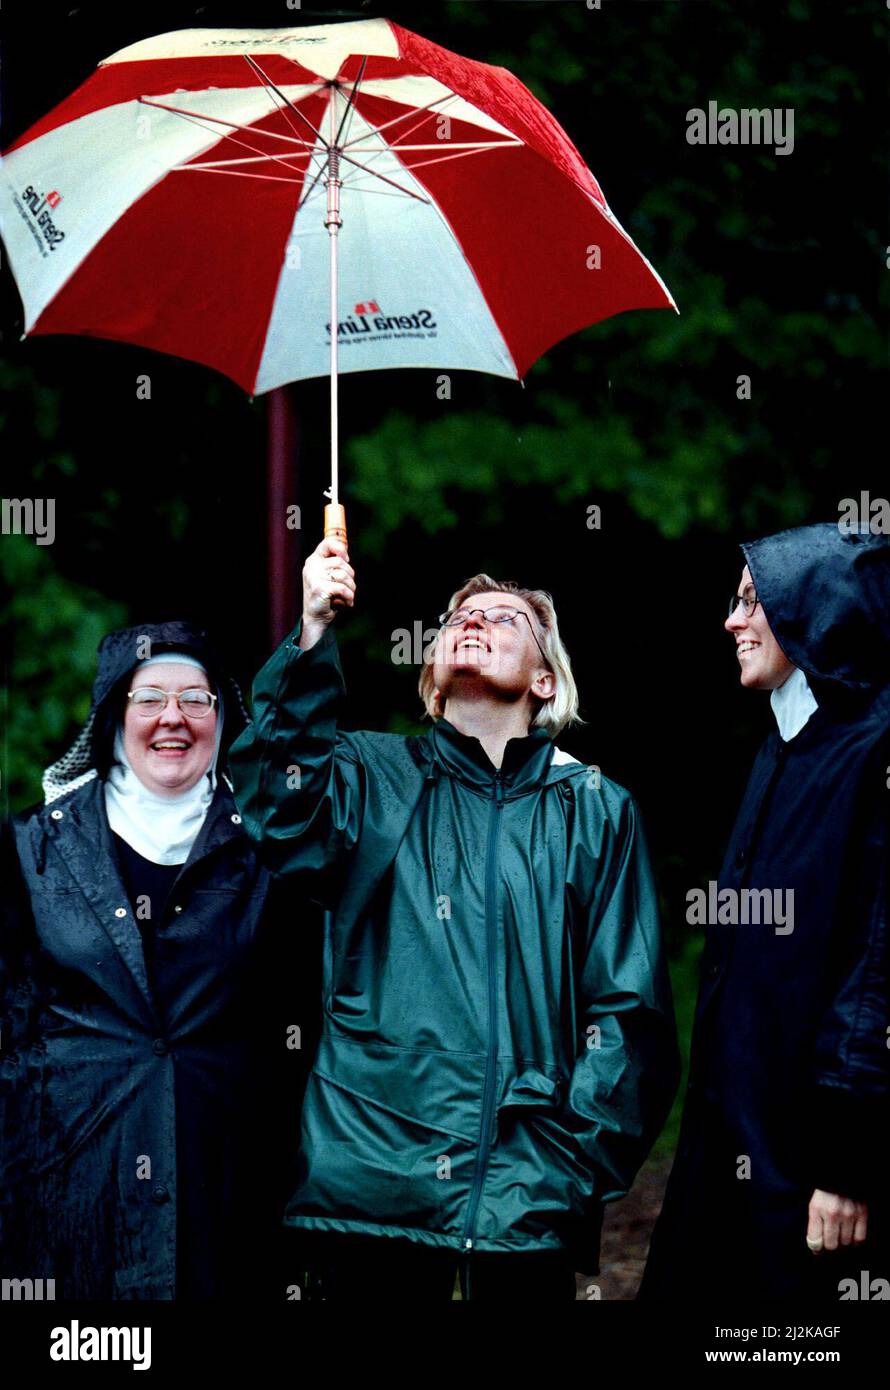 Minister for the Environment Anna Lindh thought that the visit to Ombergsliden, south of Vadstena, Sweden, was rewarding despite the rain. The gates of heaven opened and Anna Lindh had to protect the sisters Katarina and Anna from the Mariadöttrarna with an umbrella. Stock Photo